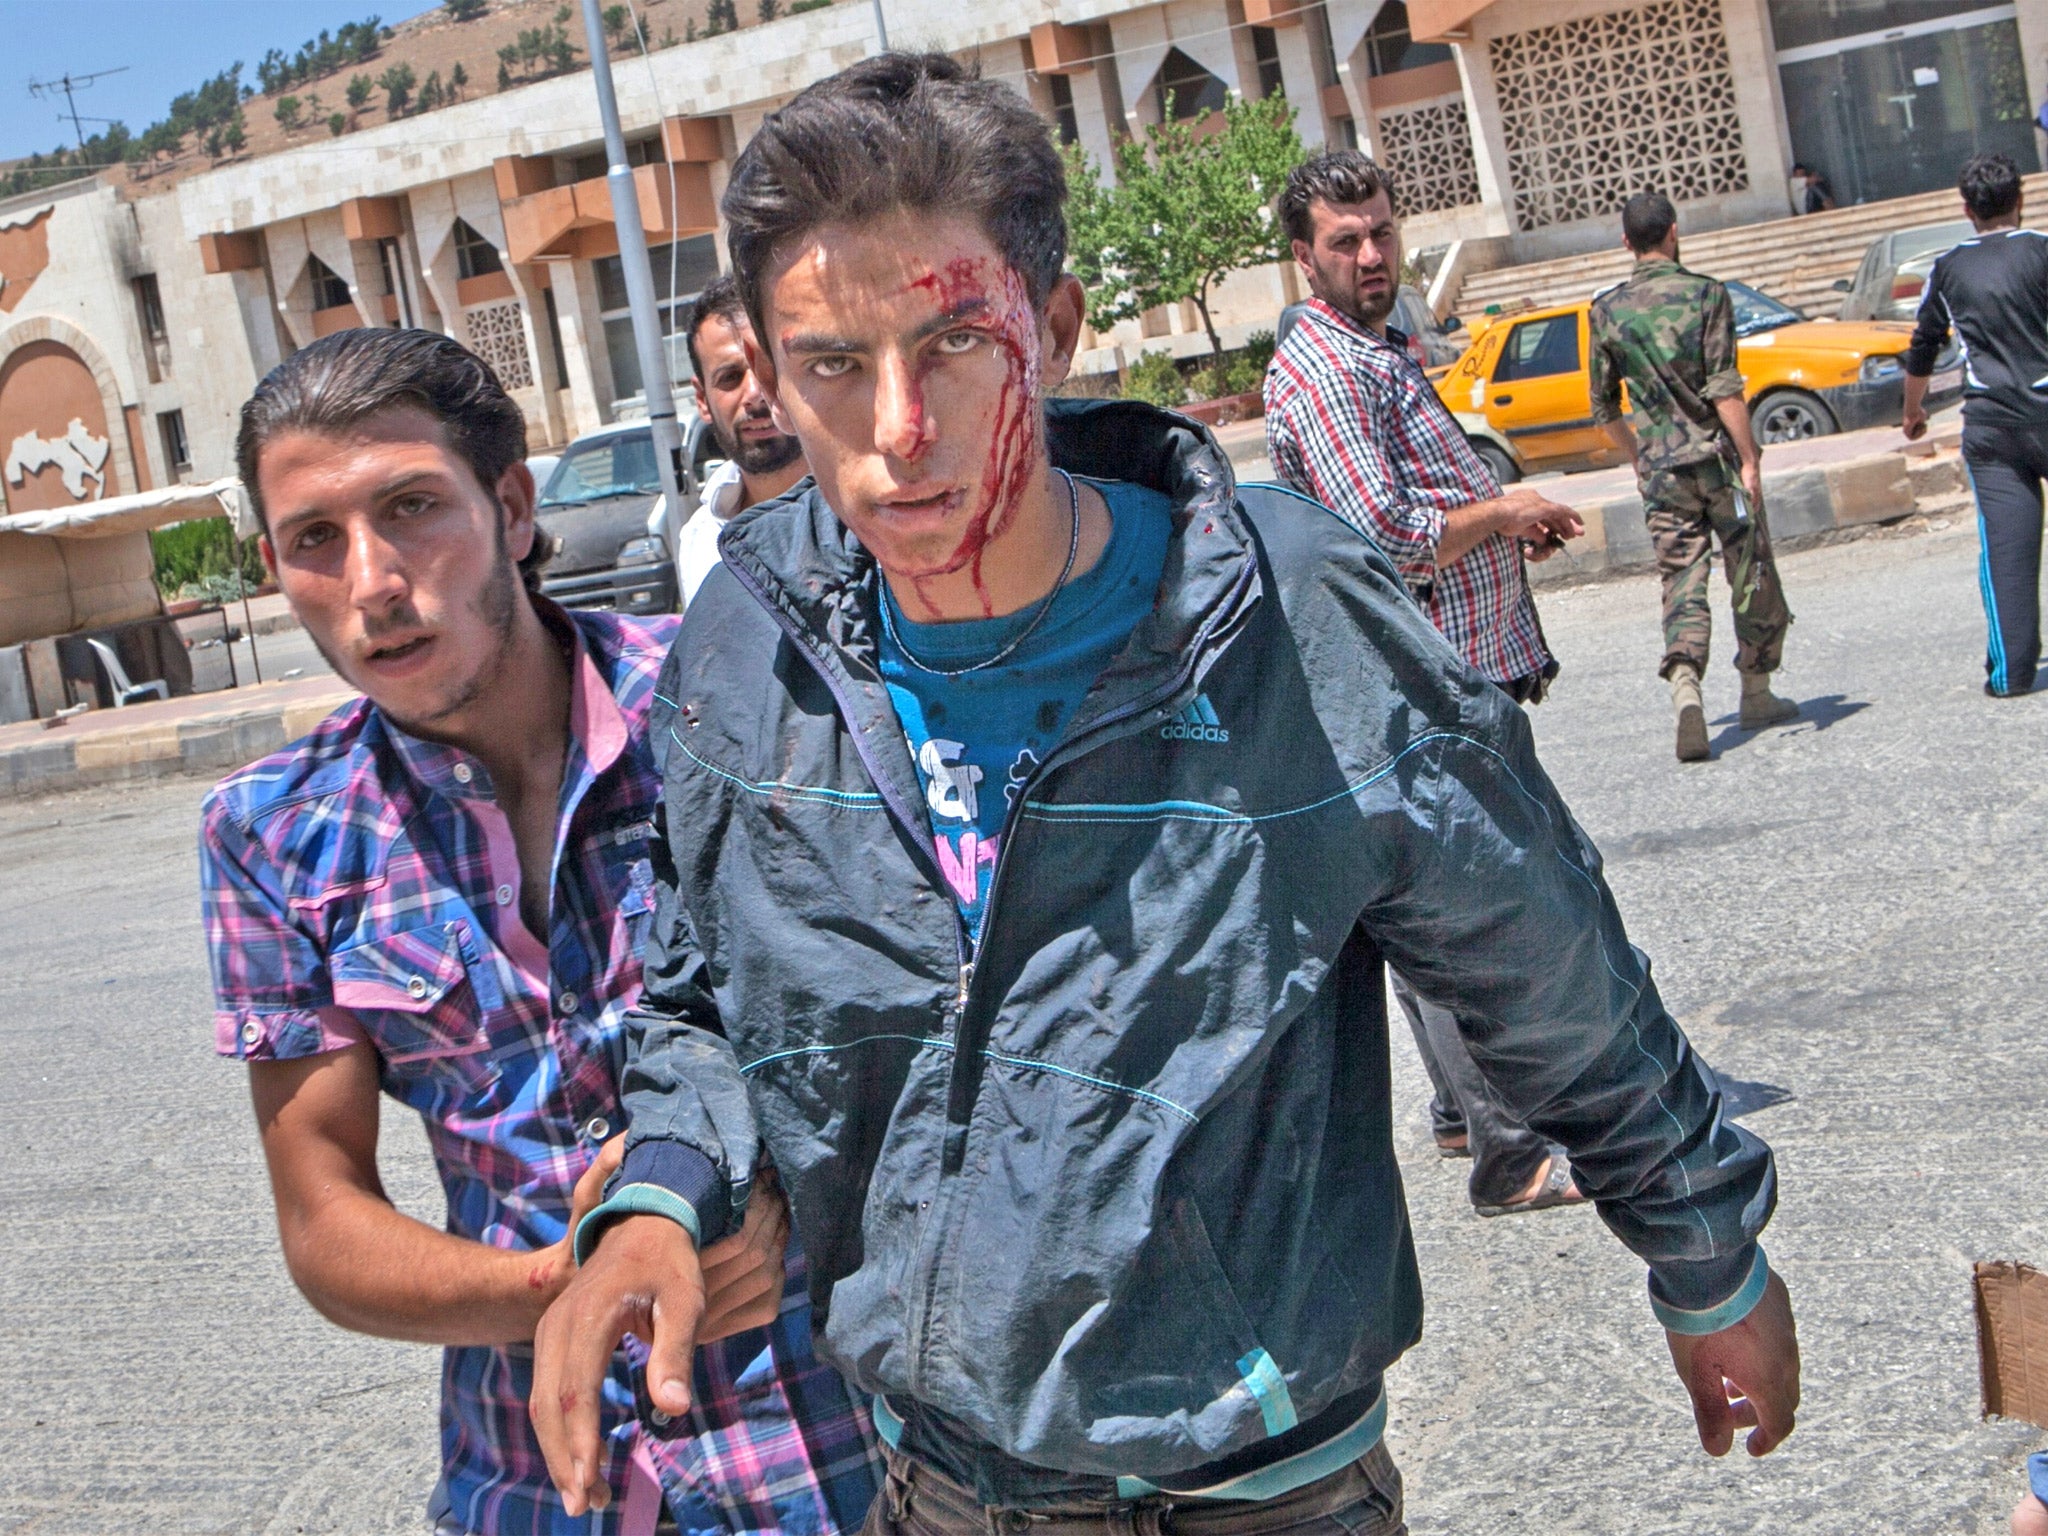 A wounded Syrian arrives for treatment at a hospital near the rebel-controlled border with Turkey